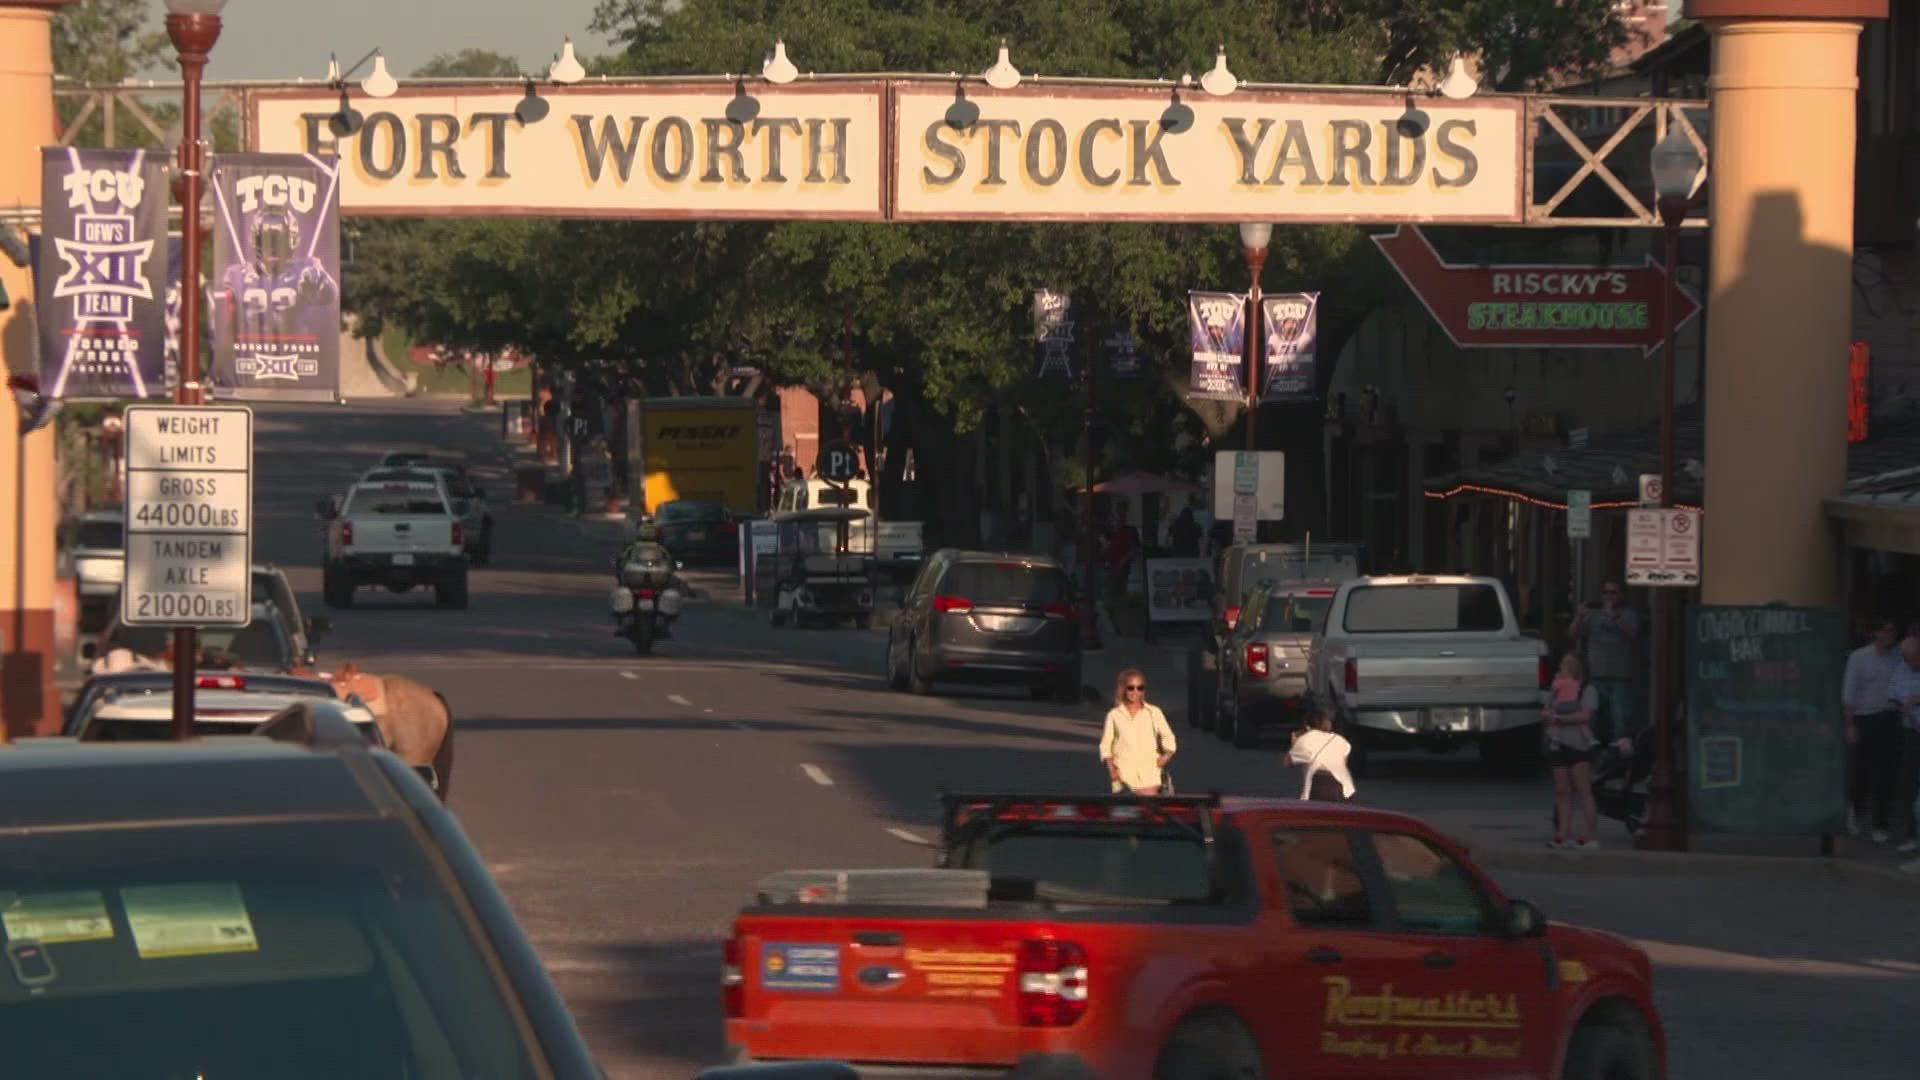 The city of Fort Worth is growing thanks in part to the film industry's interest in Cowtown.